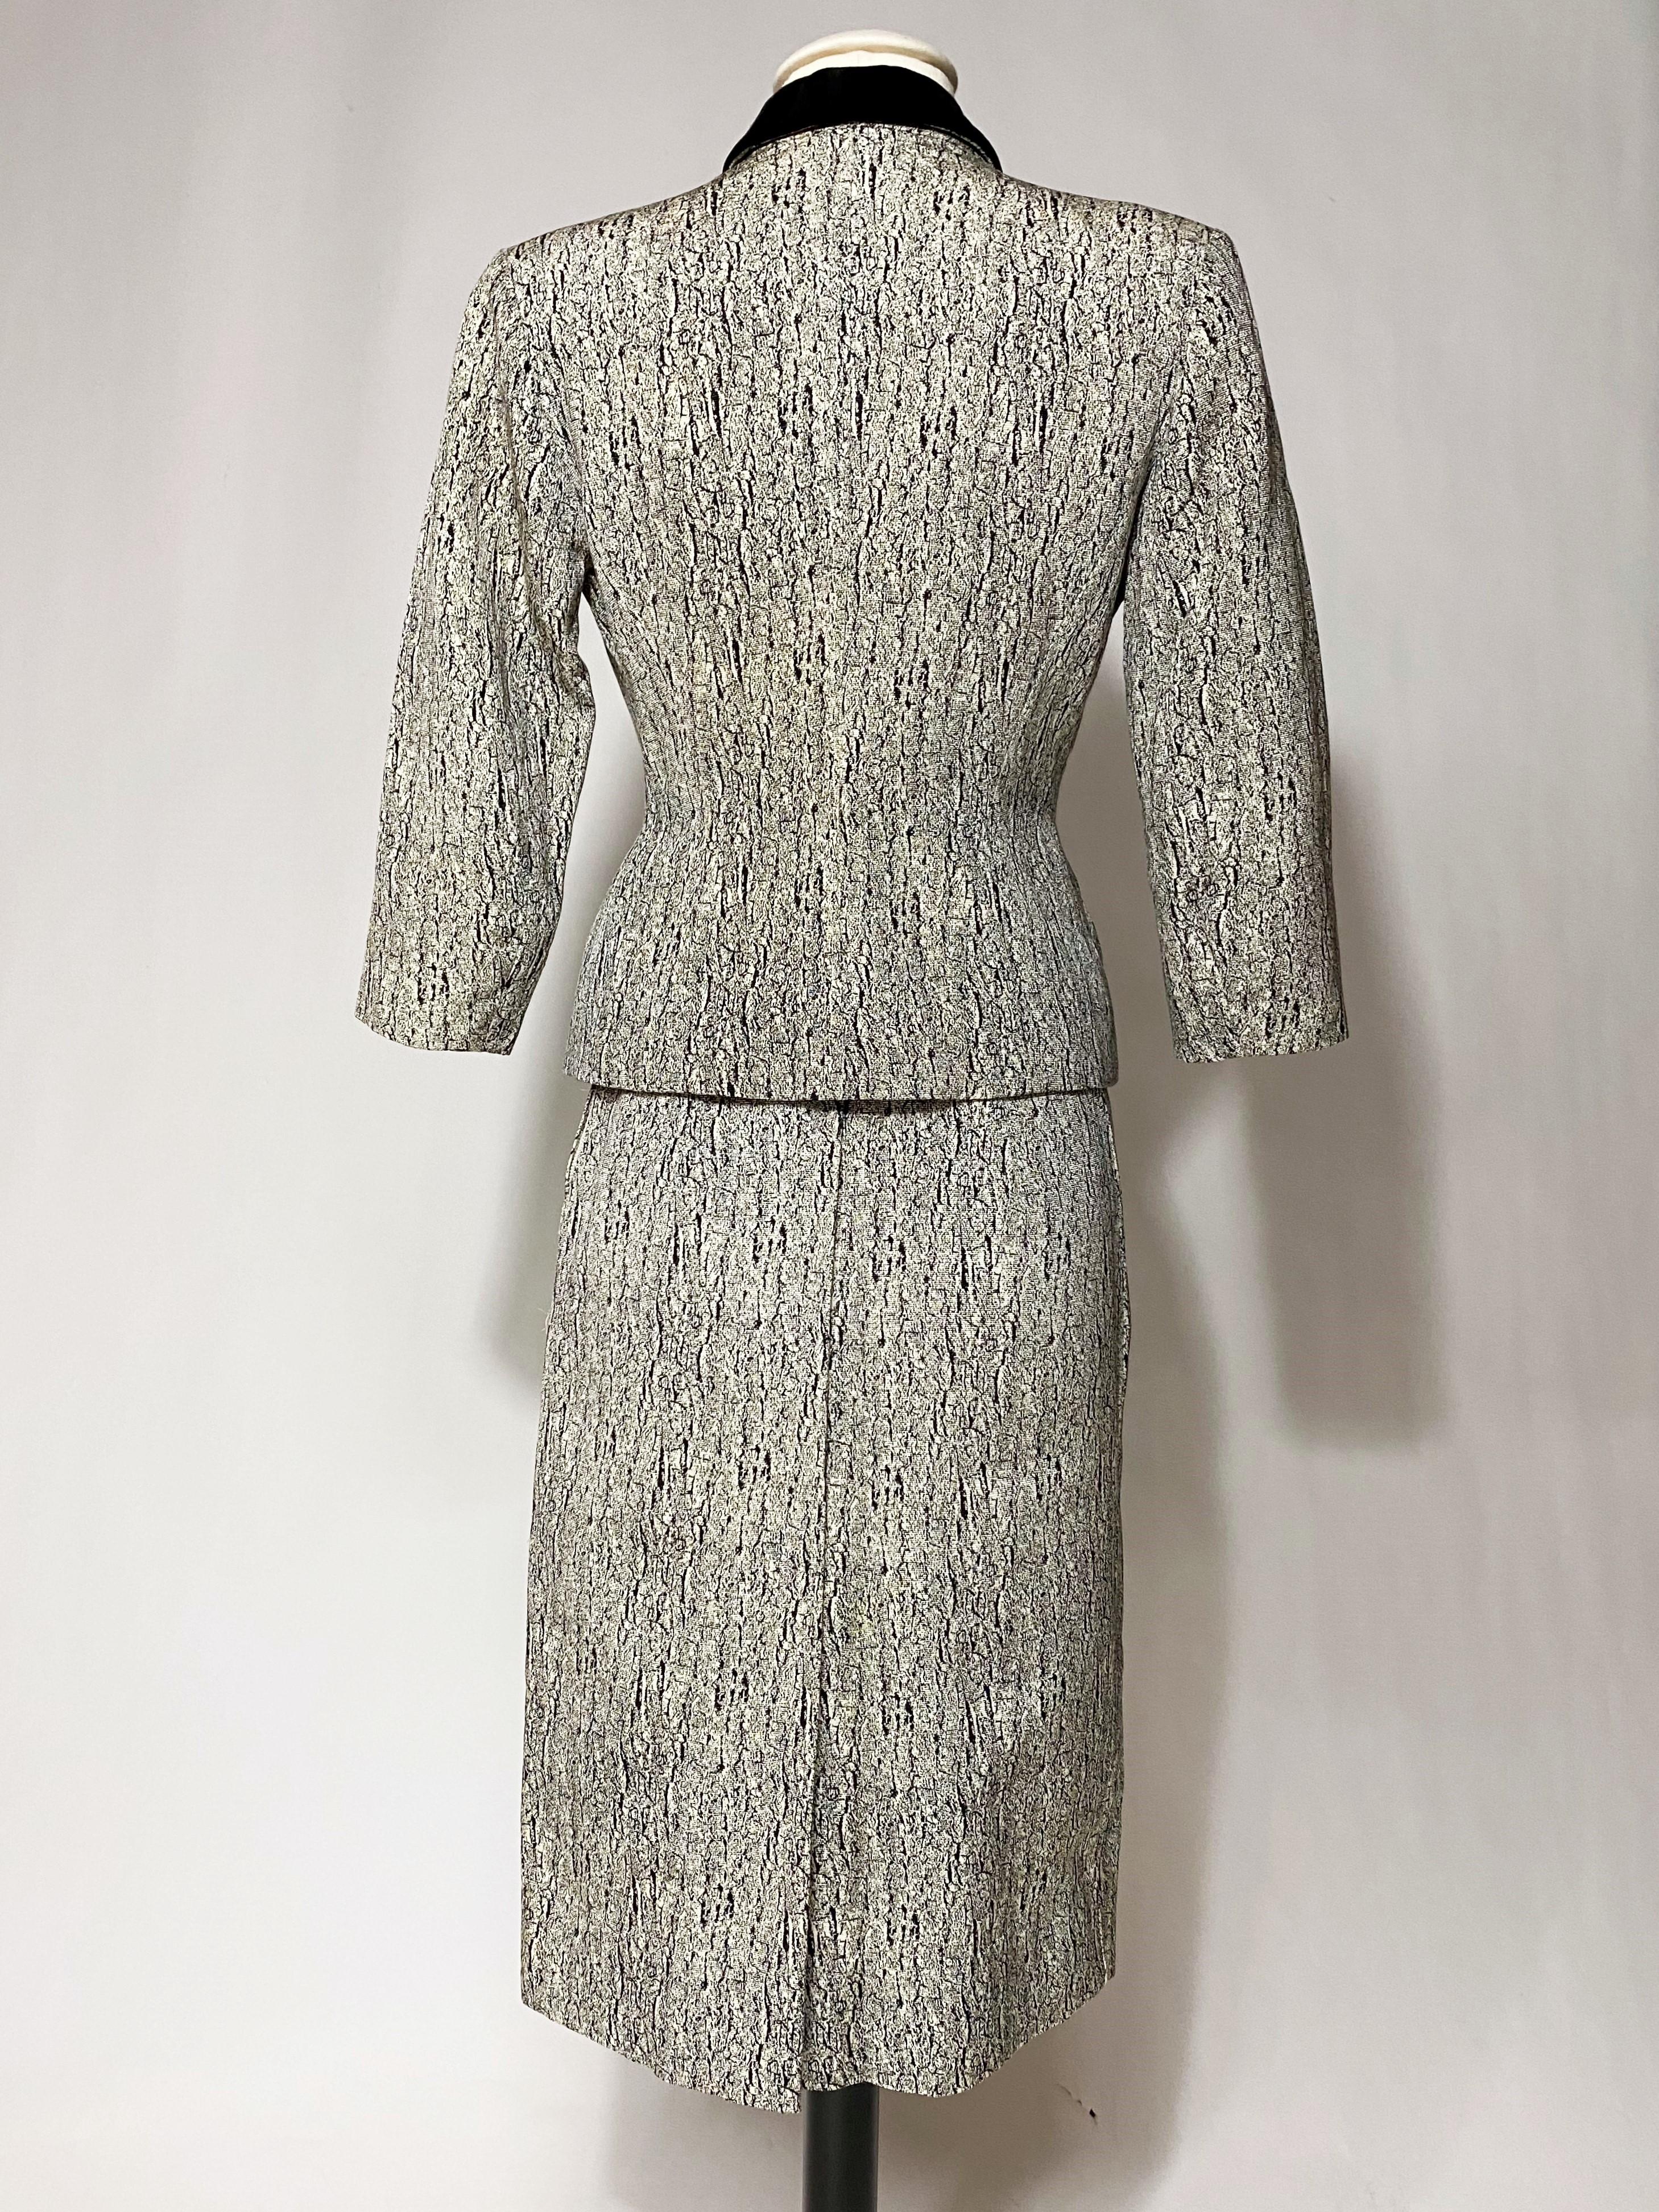 A Couture Bar skirt suit in marbled printed silk faille - France Circa 1947-1950 For Sale 3